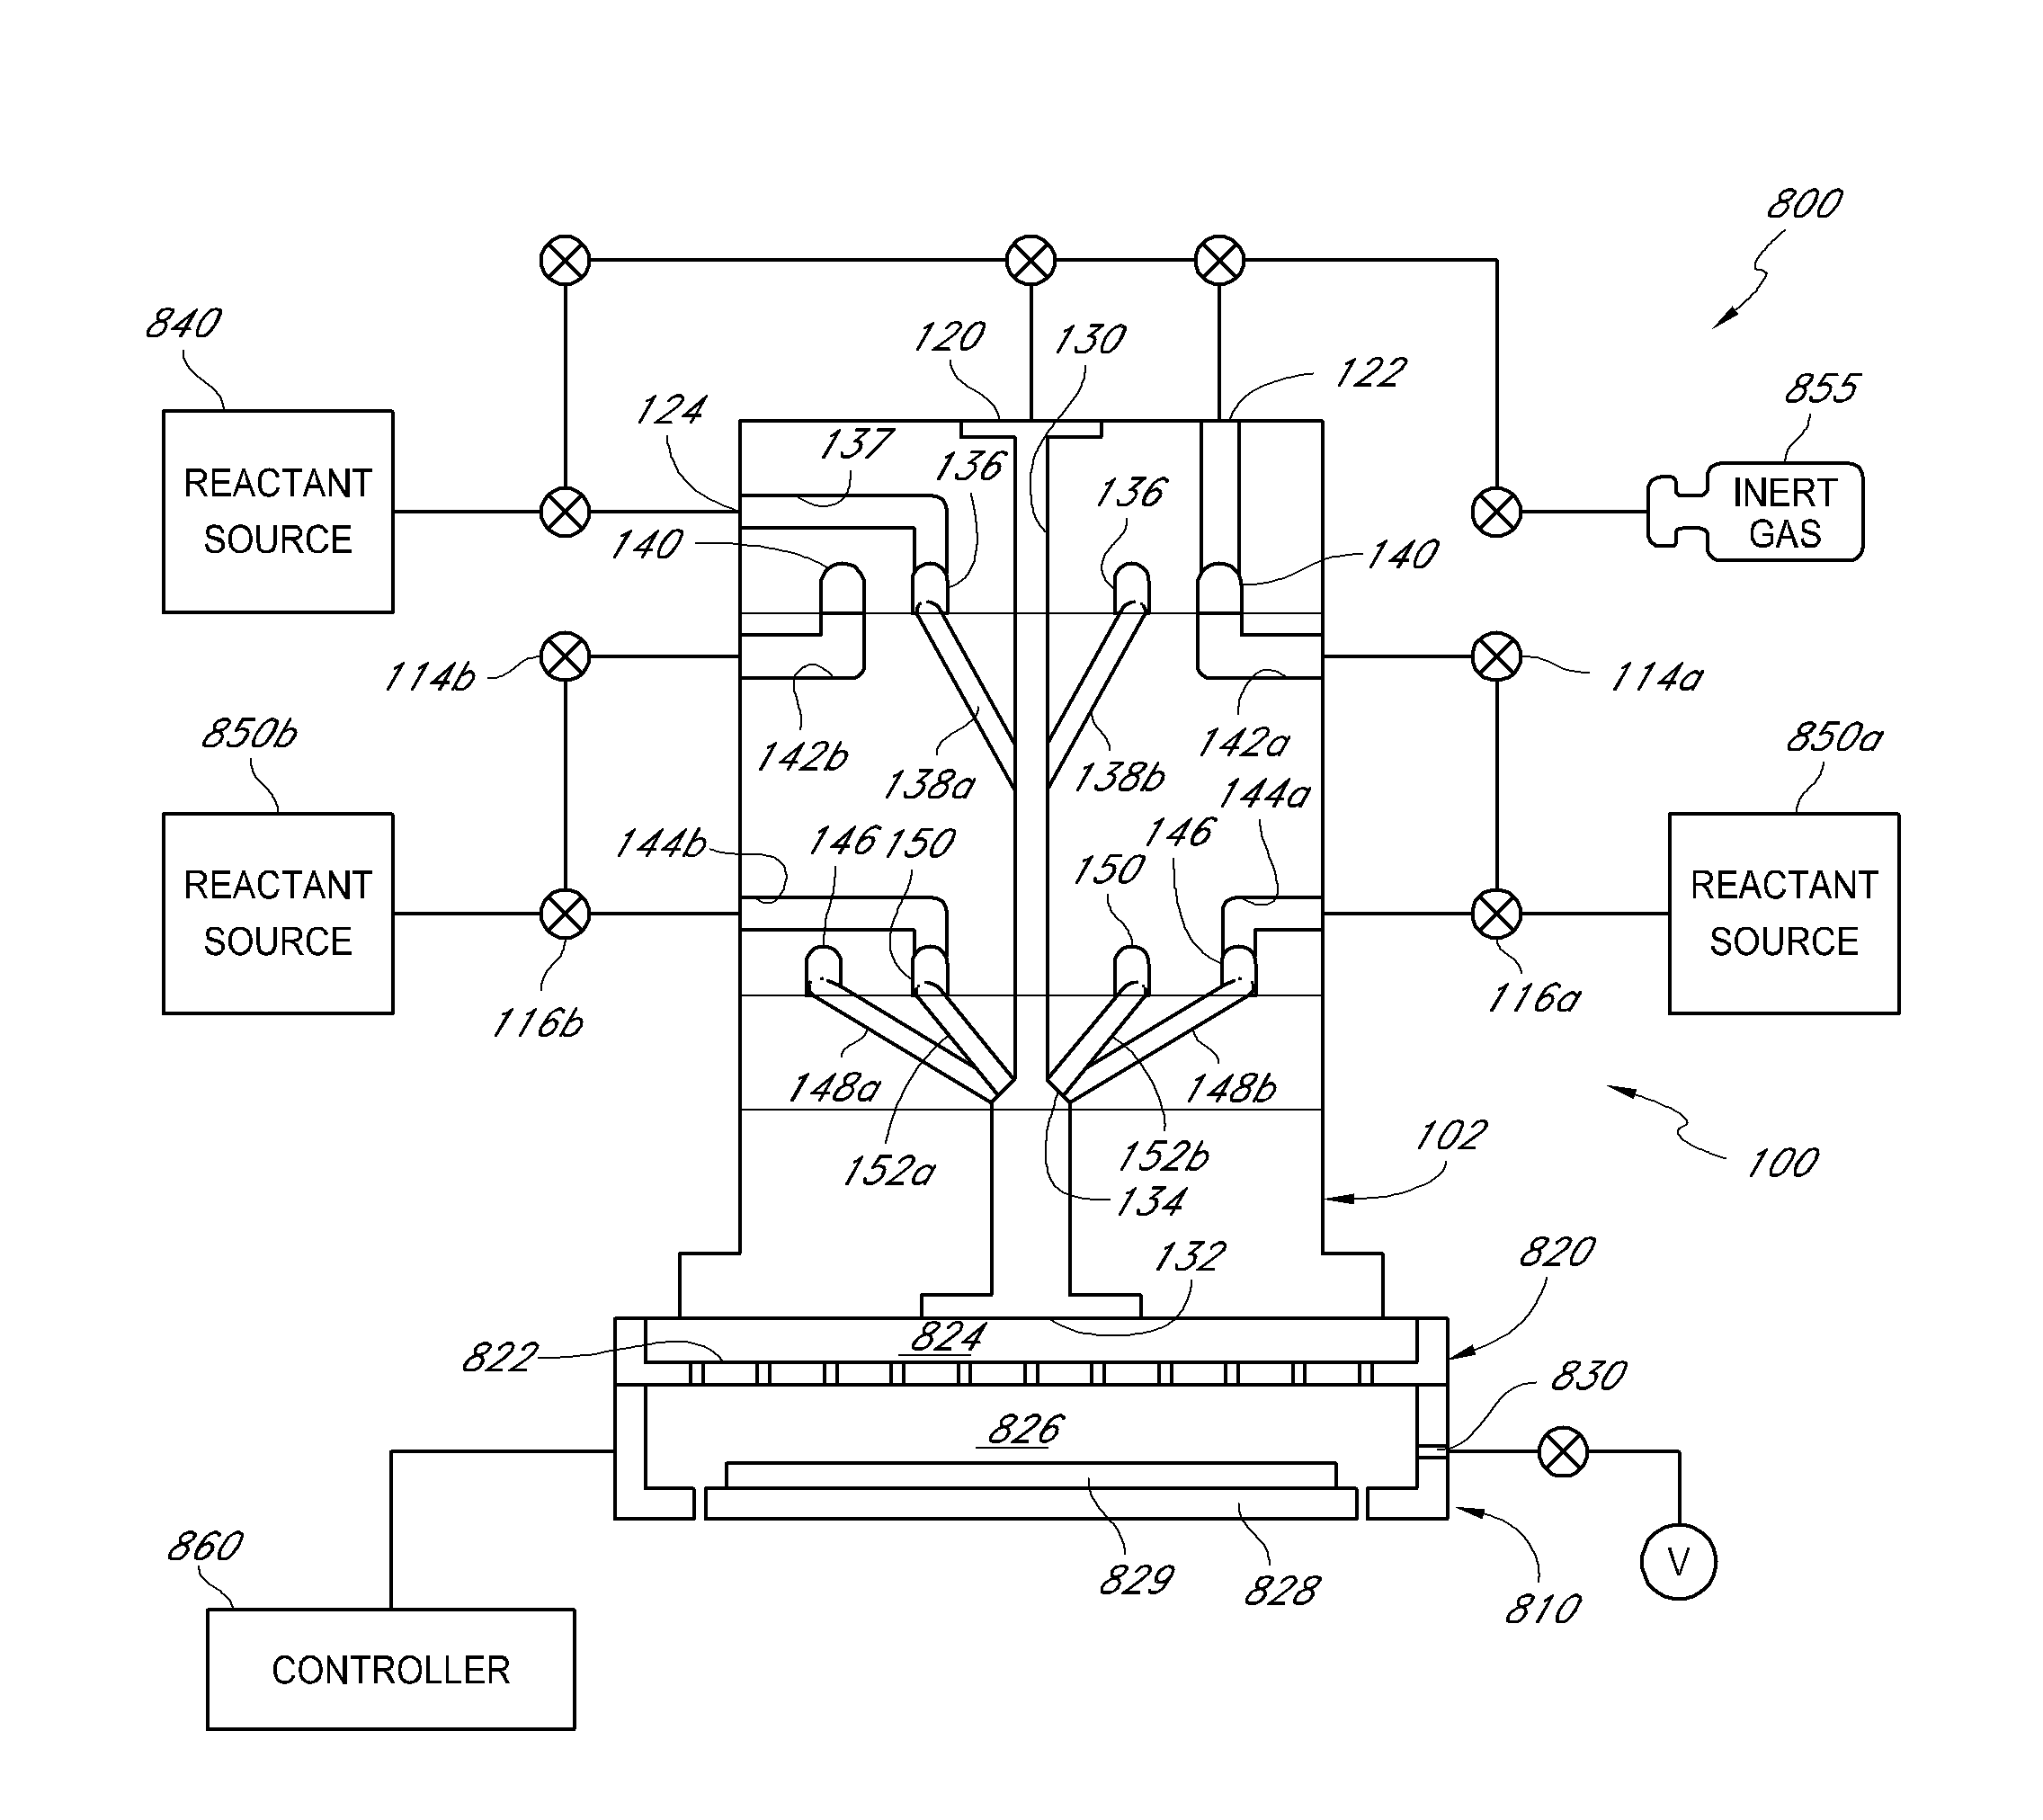 Pulsed valve manifold for atomic layer deposition